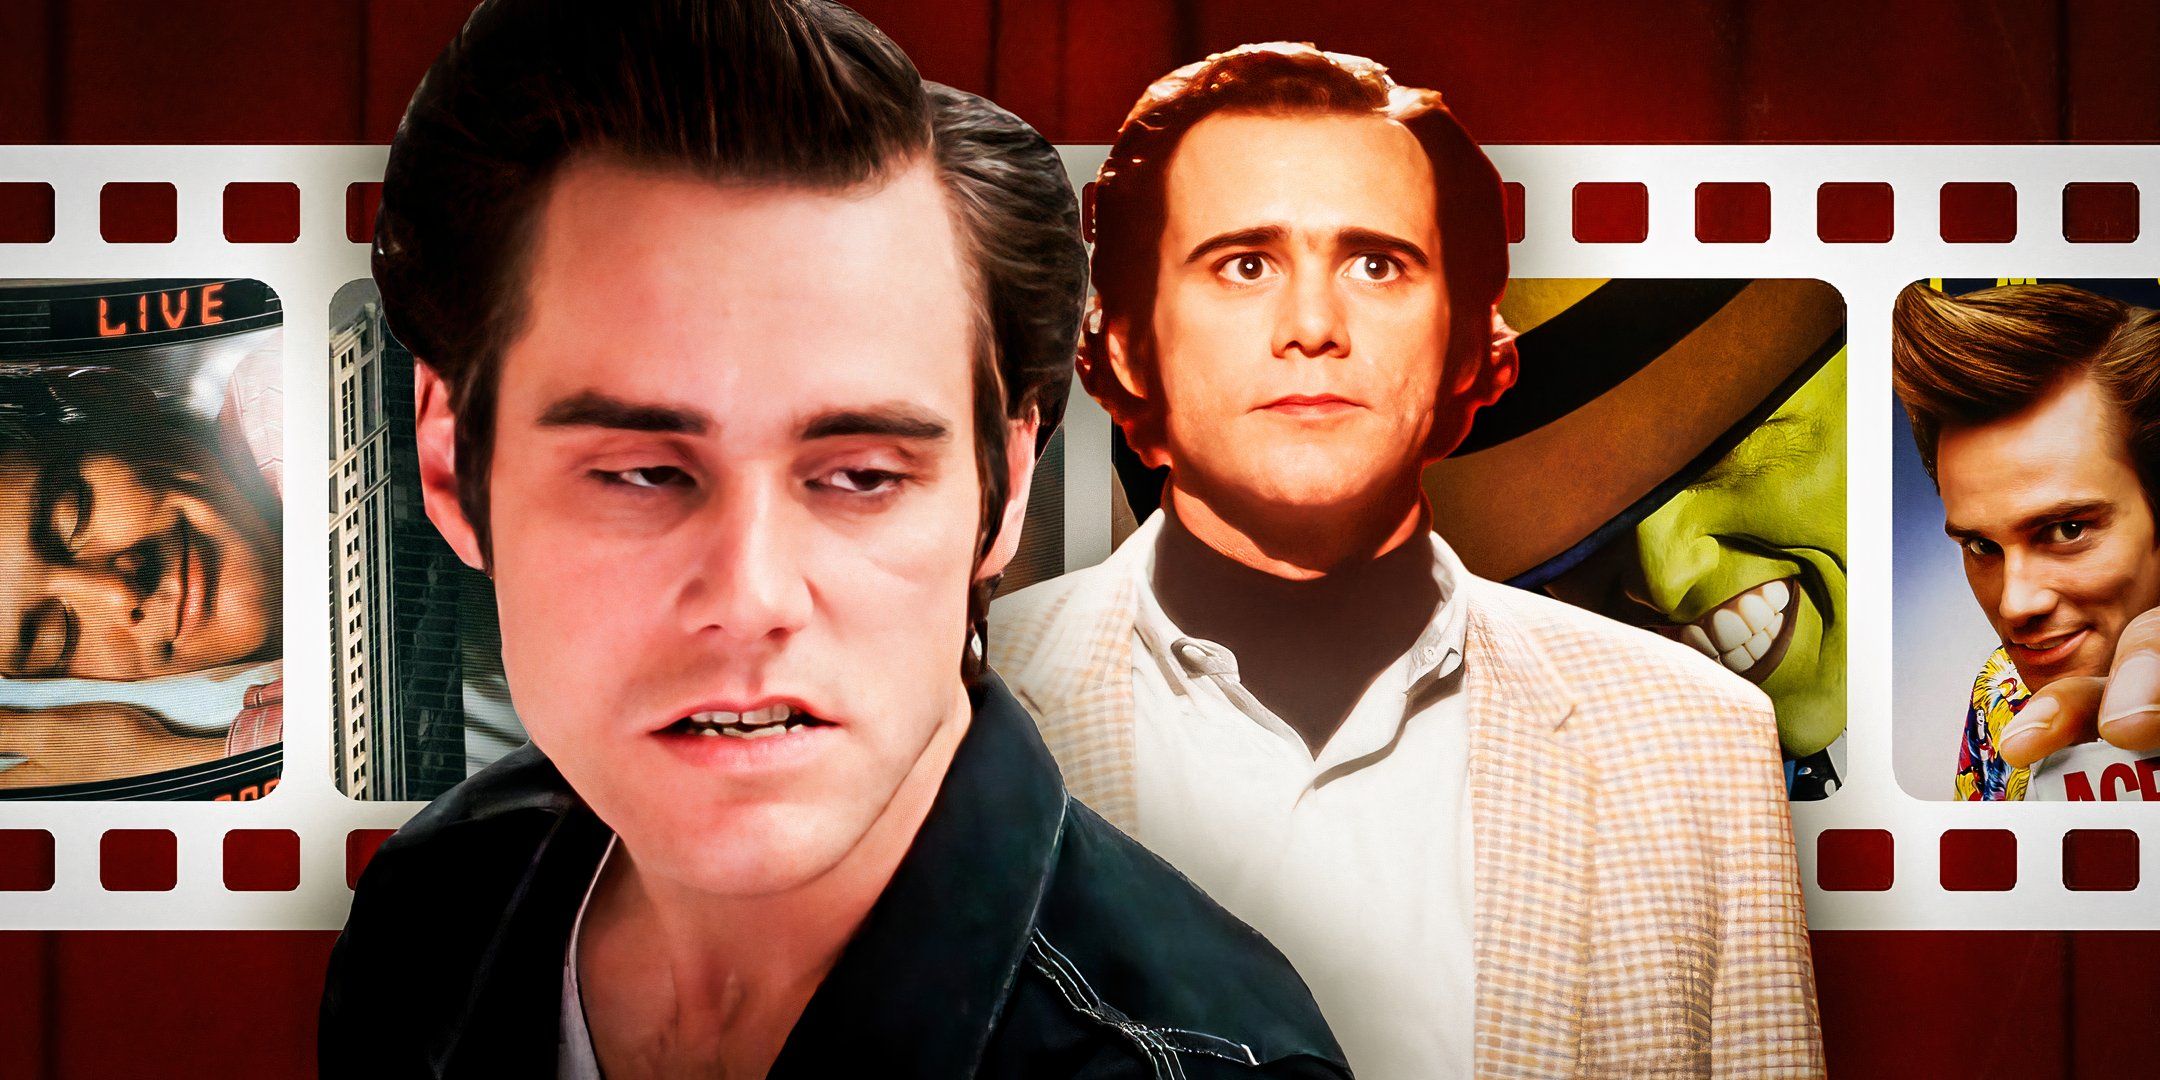 Jim-Carrey-as-Ace-Ventura-from-Ace-Ventura-Pet-Detective-and-Jim-Carrey-as-Andy-Kaufman--Tony-Clifton-from-Man-on-the-Moon